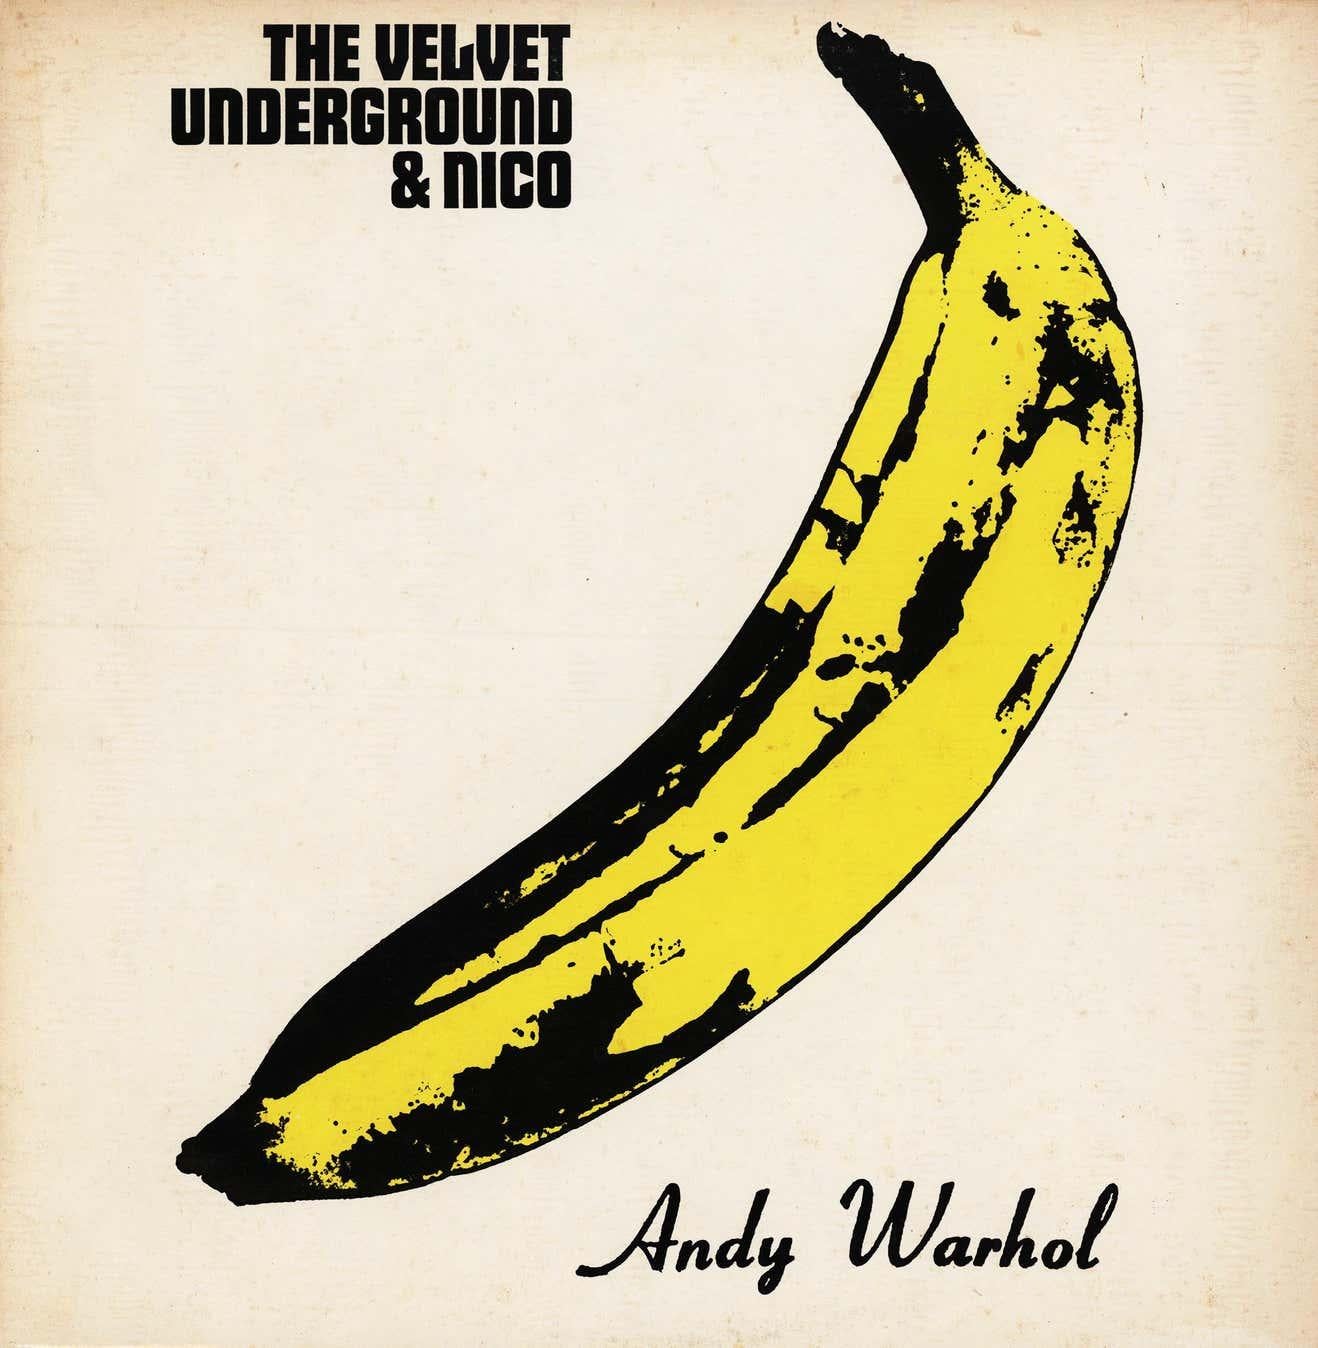 Andy Warhol Banana Cover Art:
The Velvet Underground & Nico Vinyl Record circa early 1980's featuring original Record Cover Art after Andy Warhol. A rare impression in very good to excellent condition. 

Medium: Off Set Lithograph on record